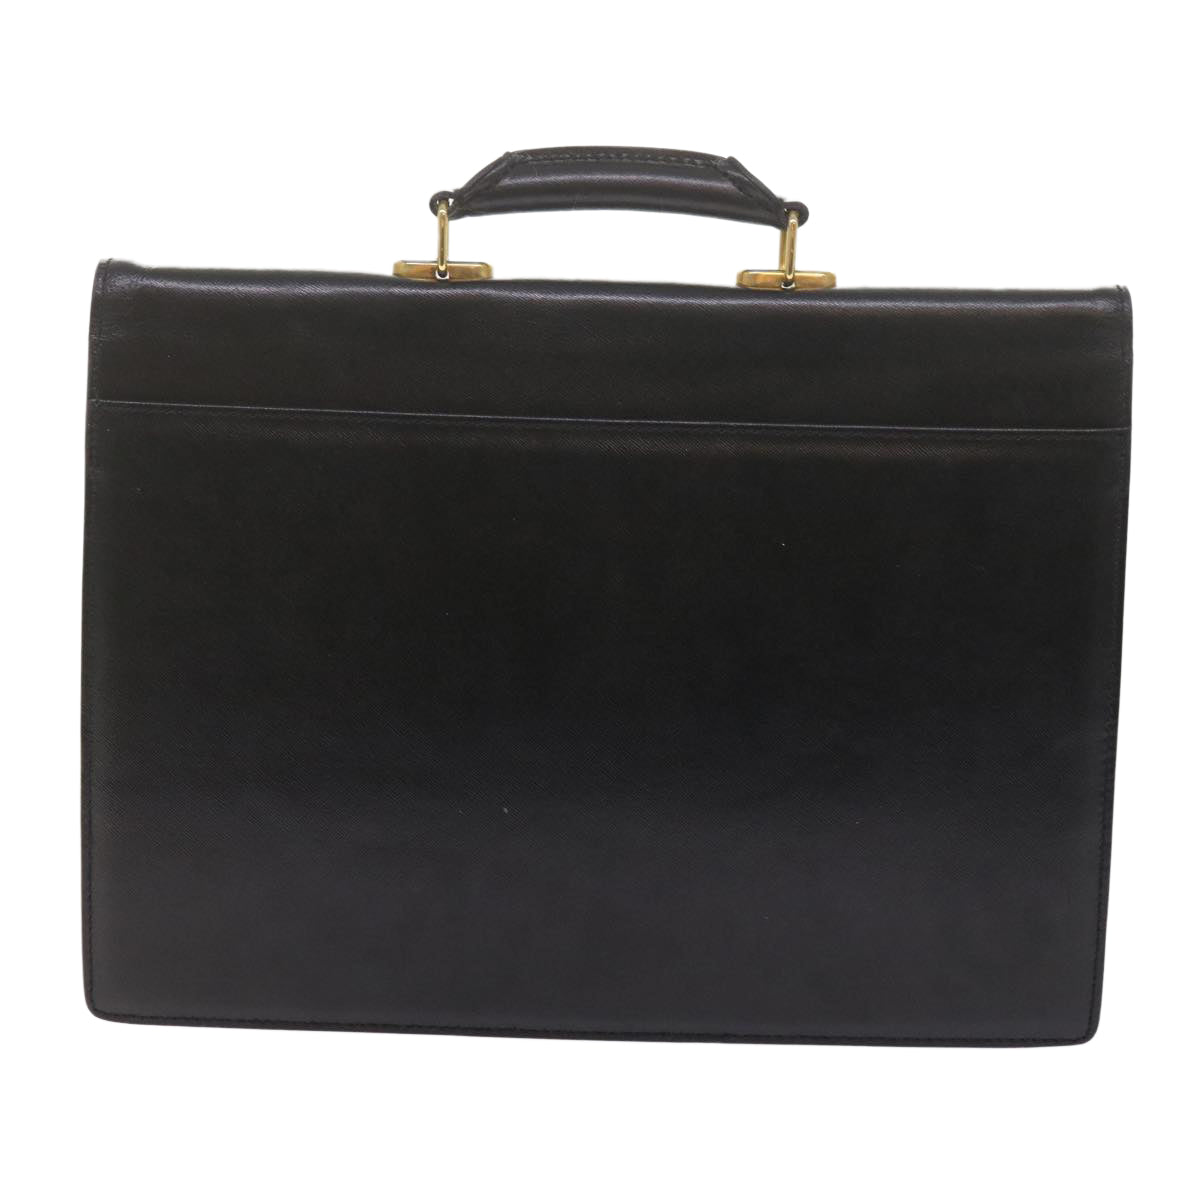 VALENTINO Business Bag Leather Black Auth bs10775 - 0